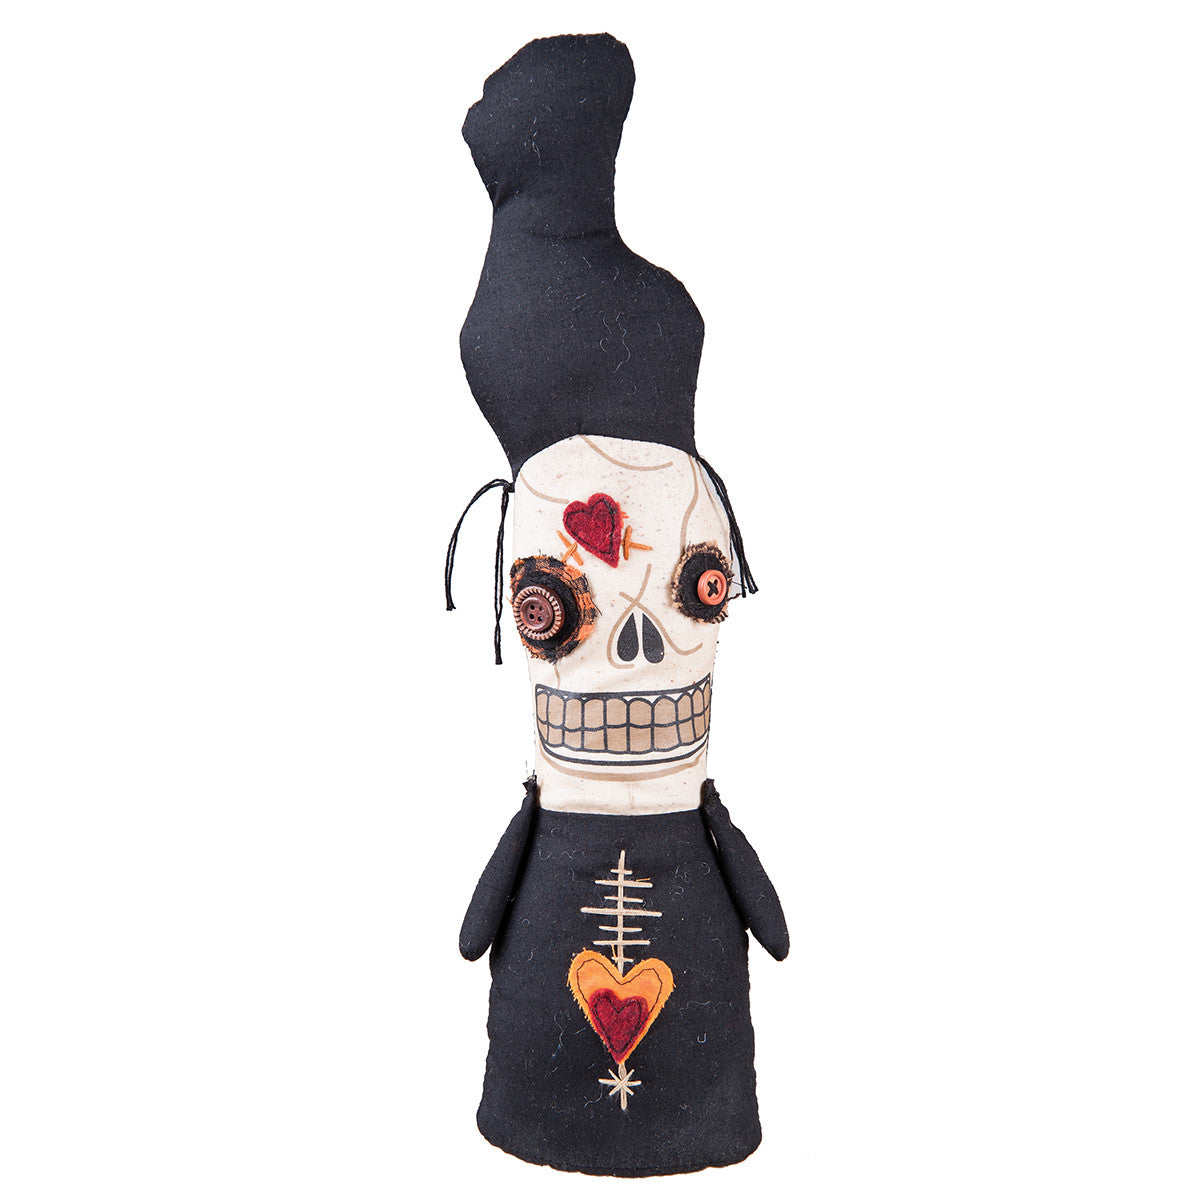 Madame Macabre Monster - Ugly  Cloth Halloween Doll